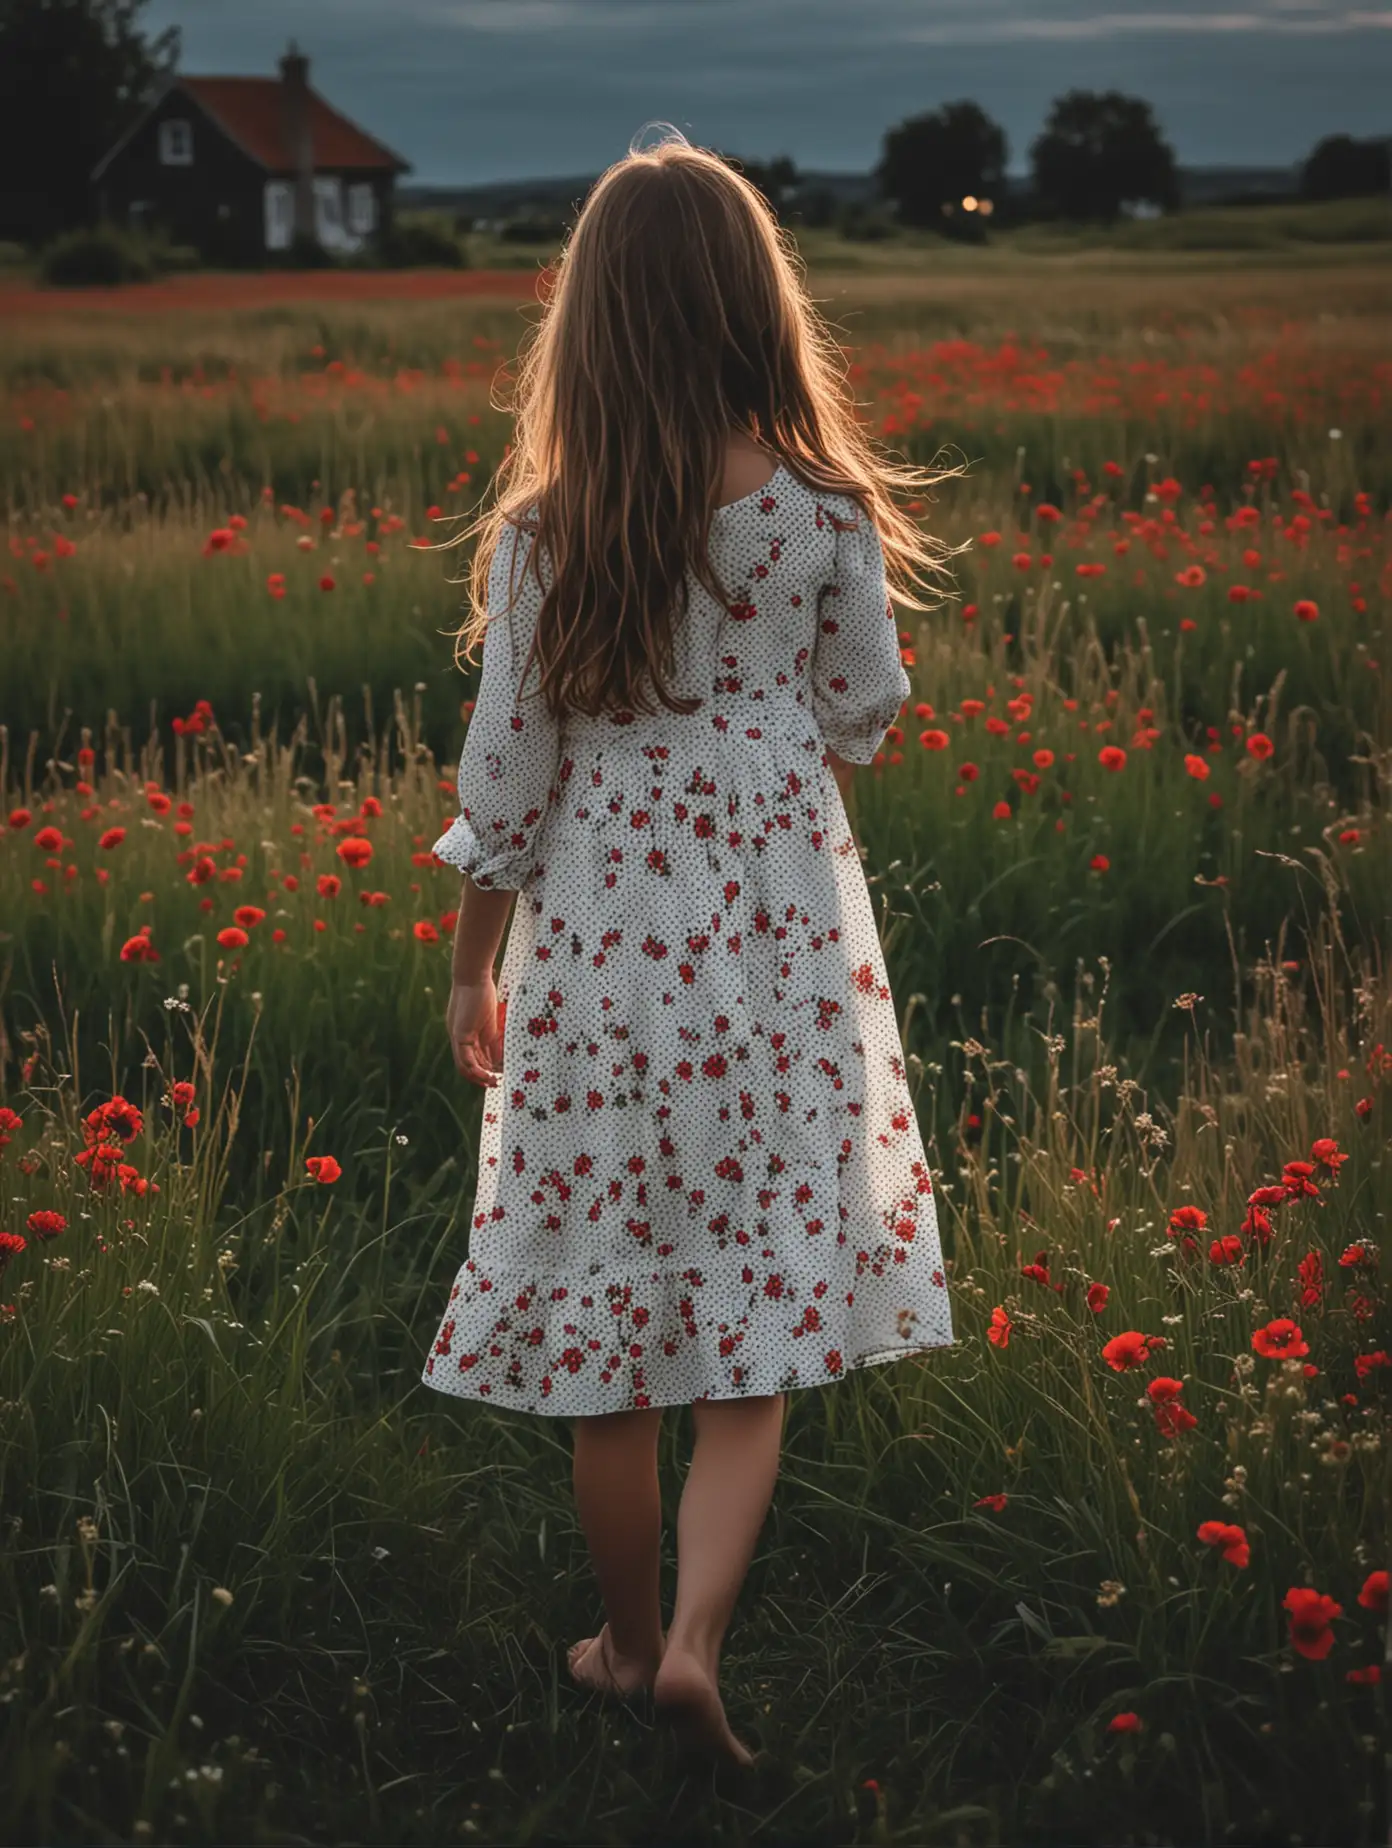 Child with Long Hair in White Dress Standing in Meadow Field at Night with Red Flowers in Stormy Weather